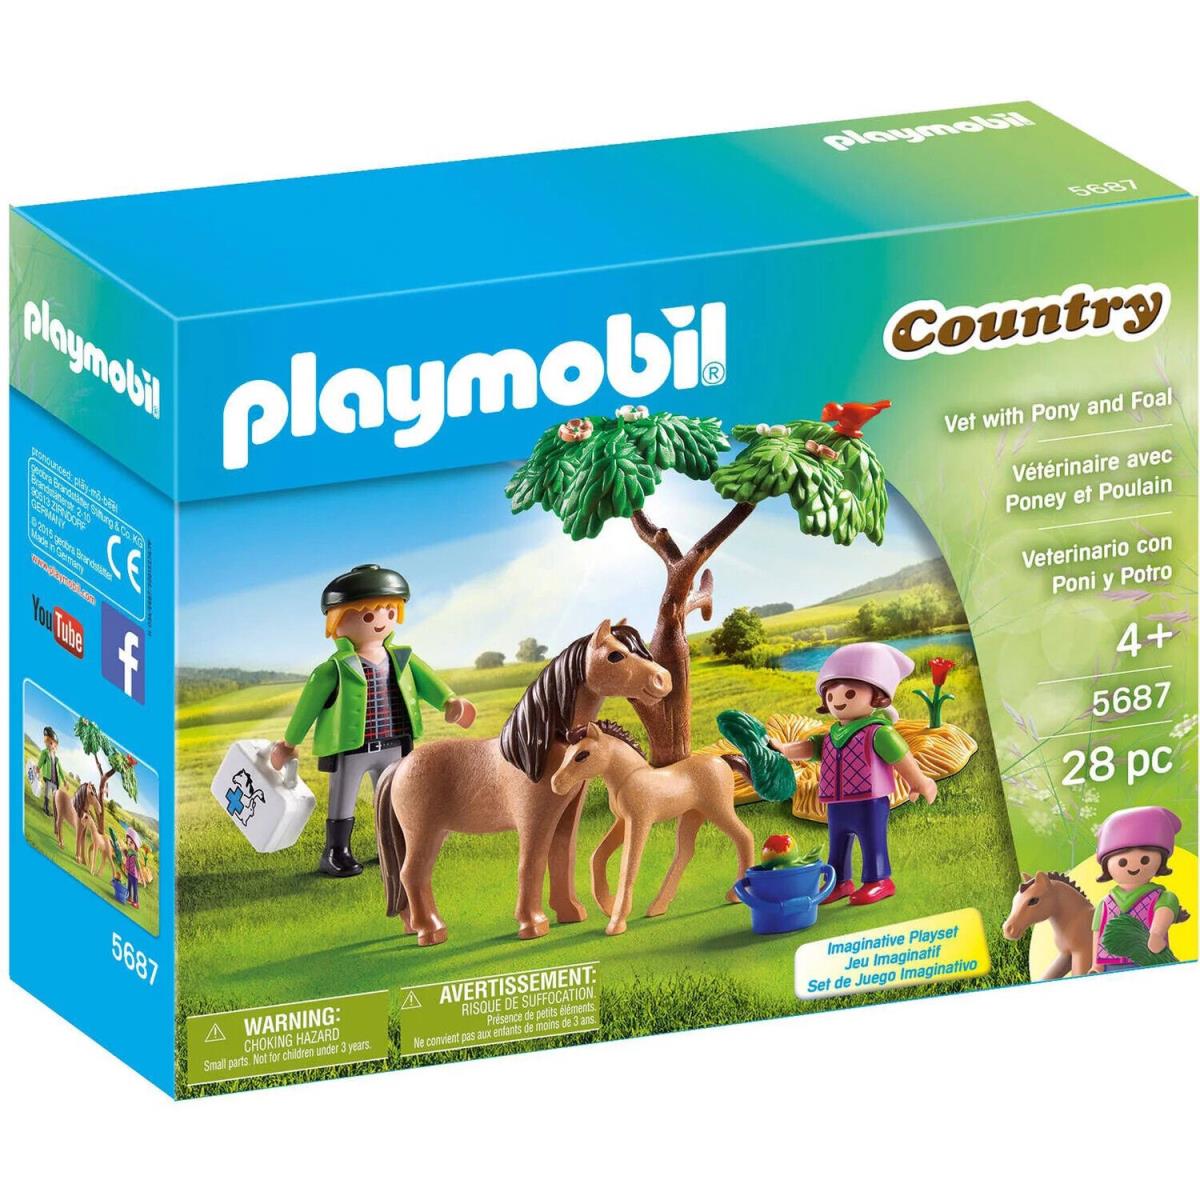 Playmobil 5687 Vet with Pony and Foal Equestian Horse Jockey